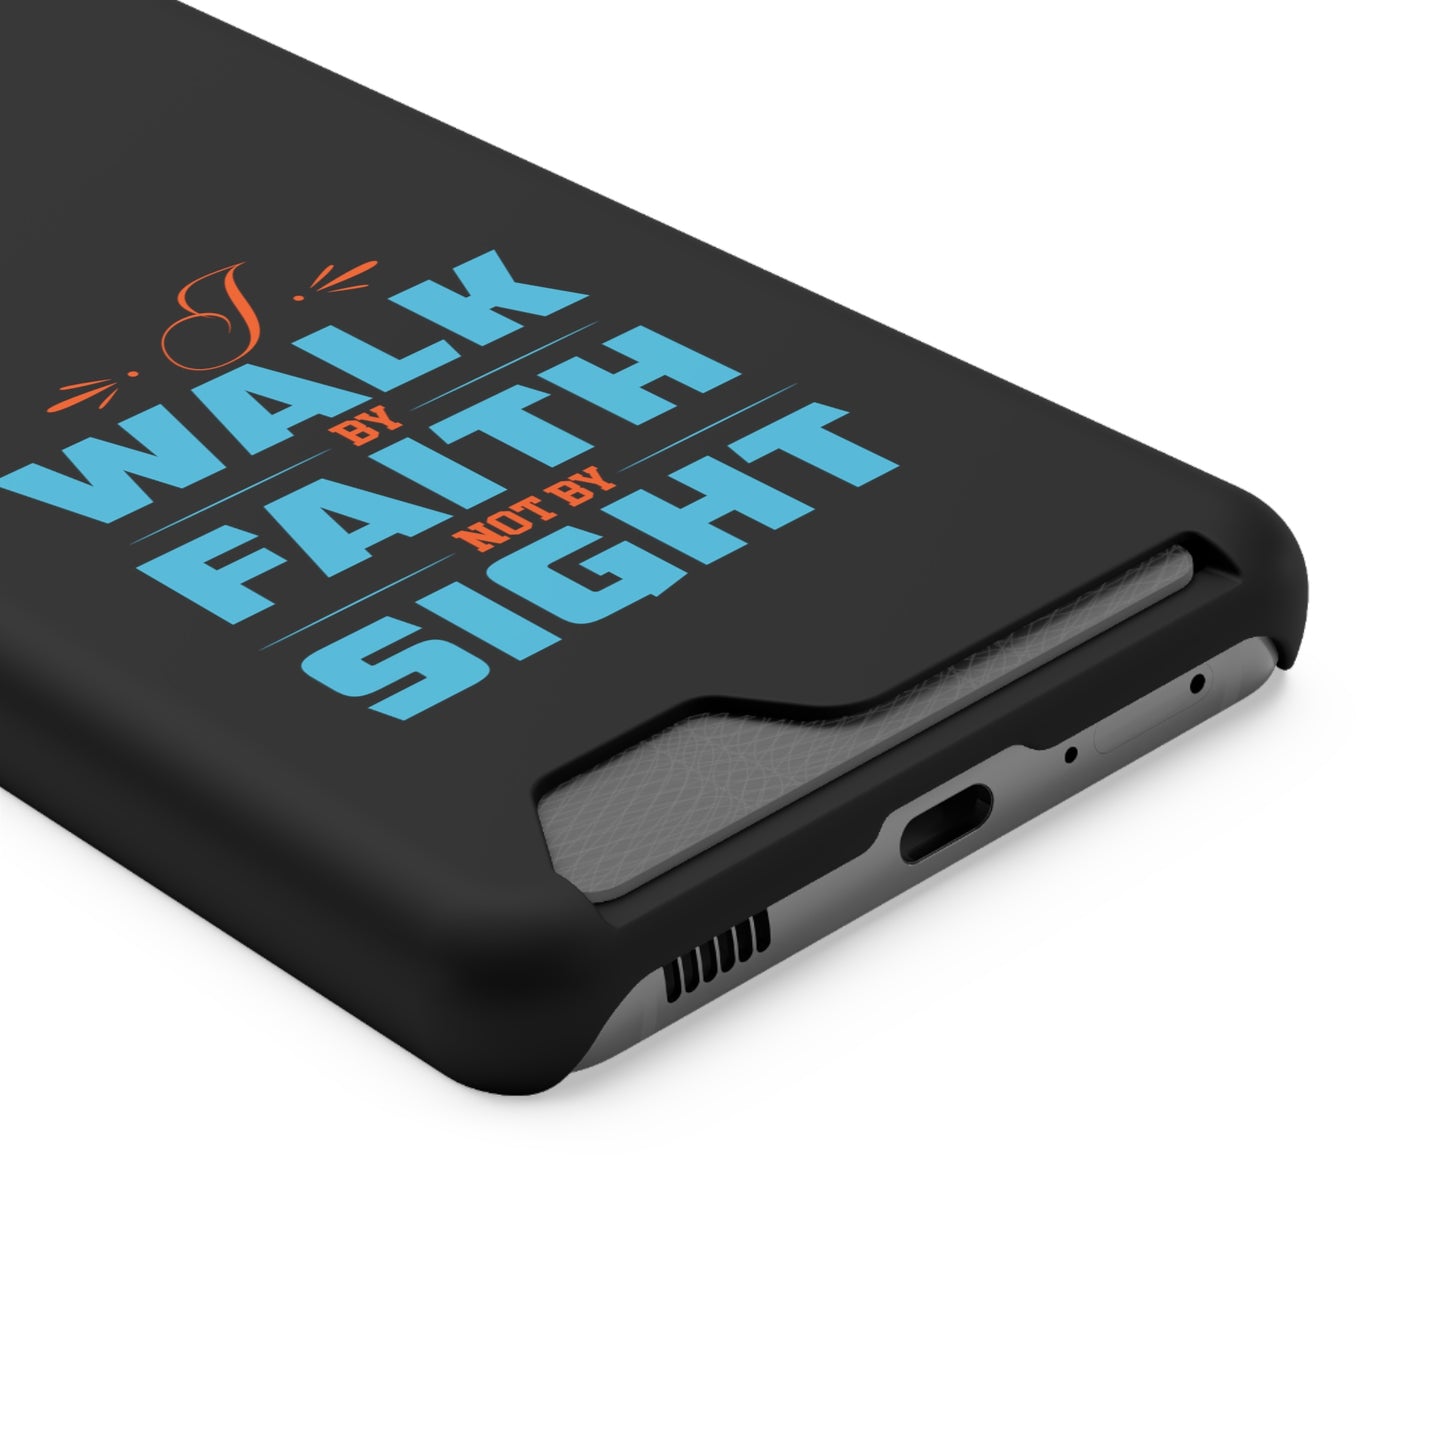 I Walk By Faith & Not By Sight Phone Case With Card Holder